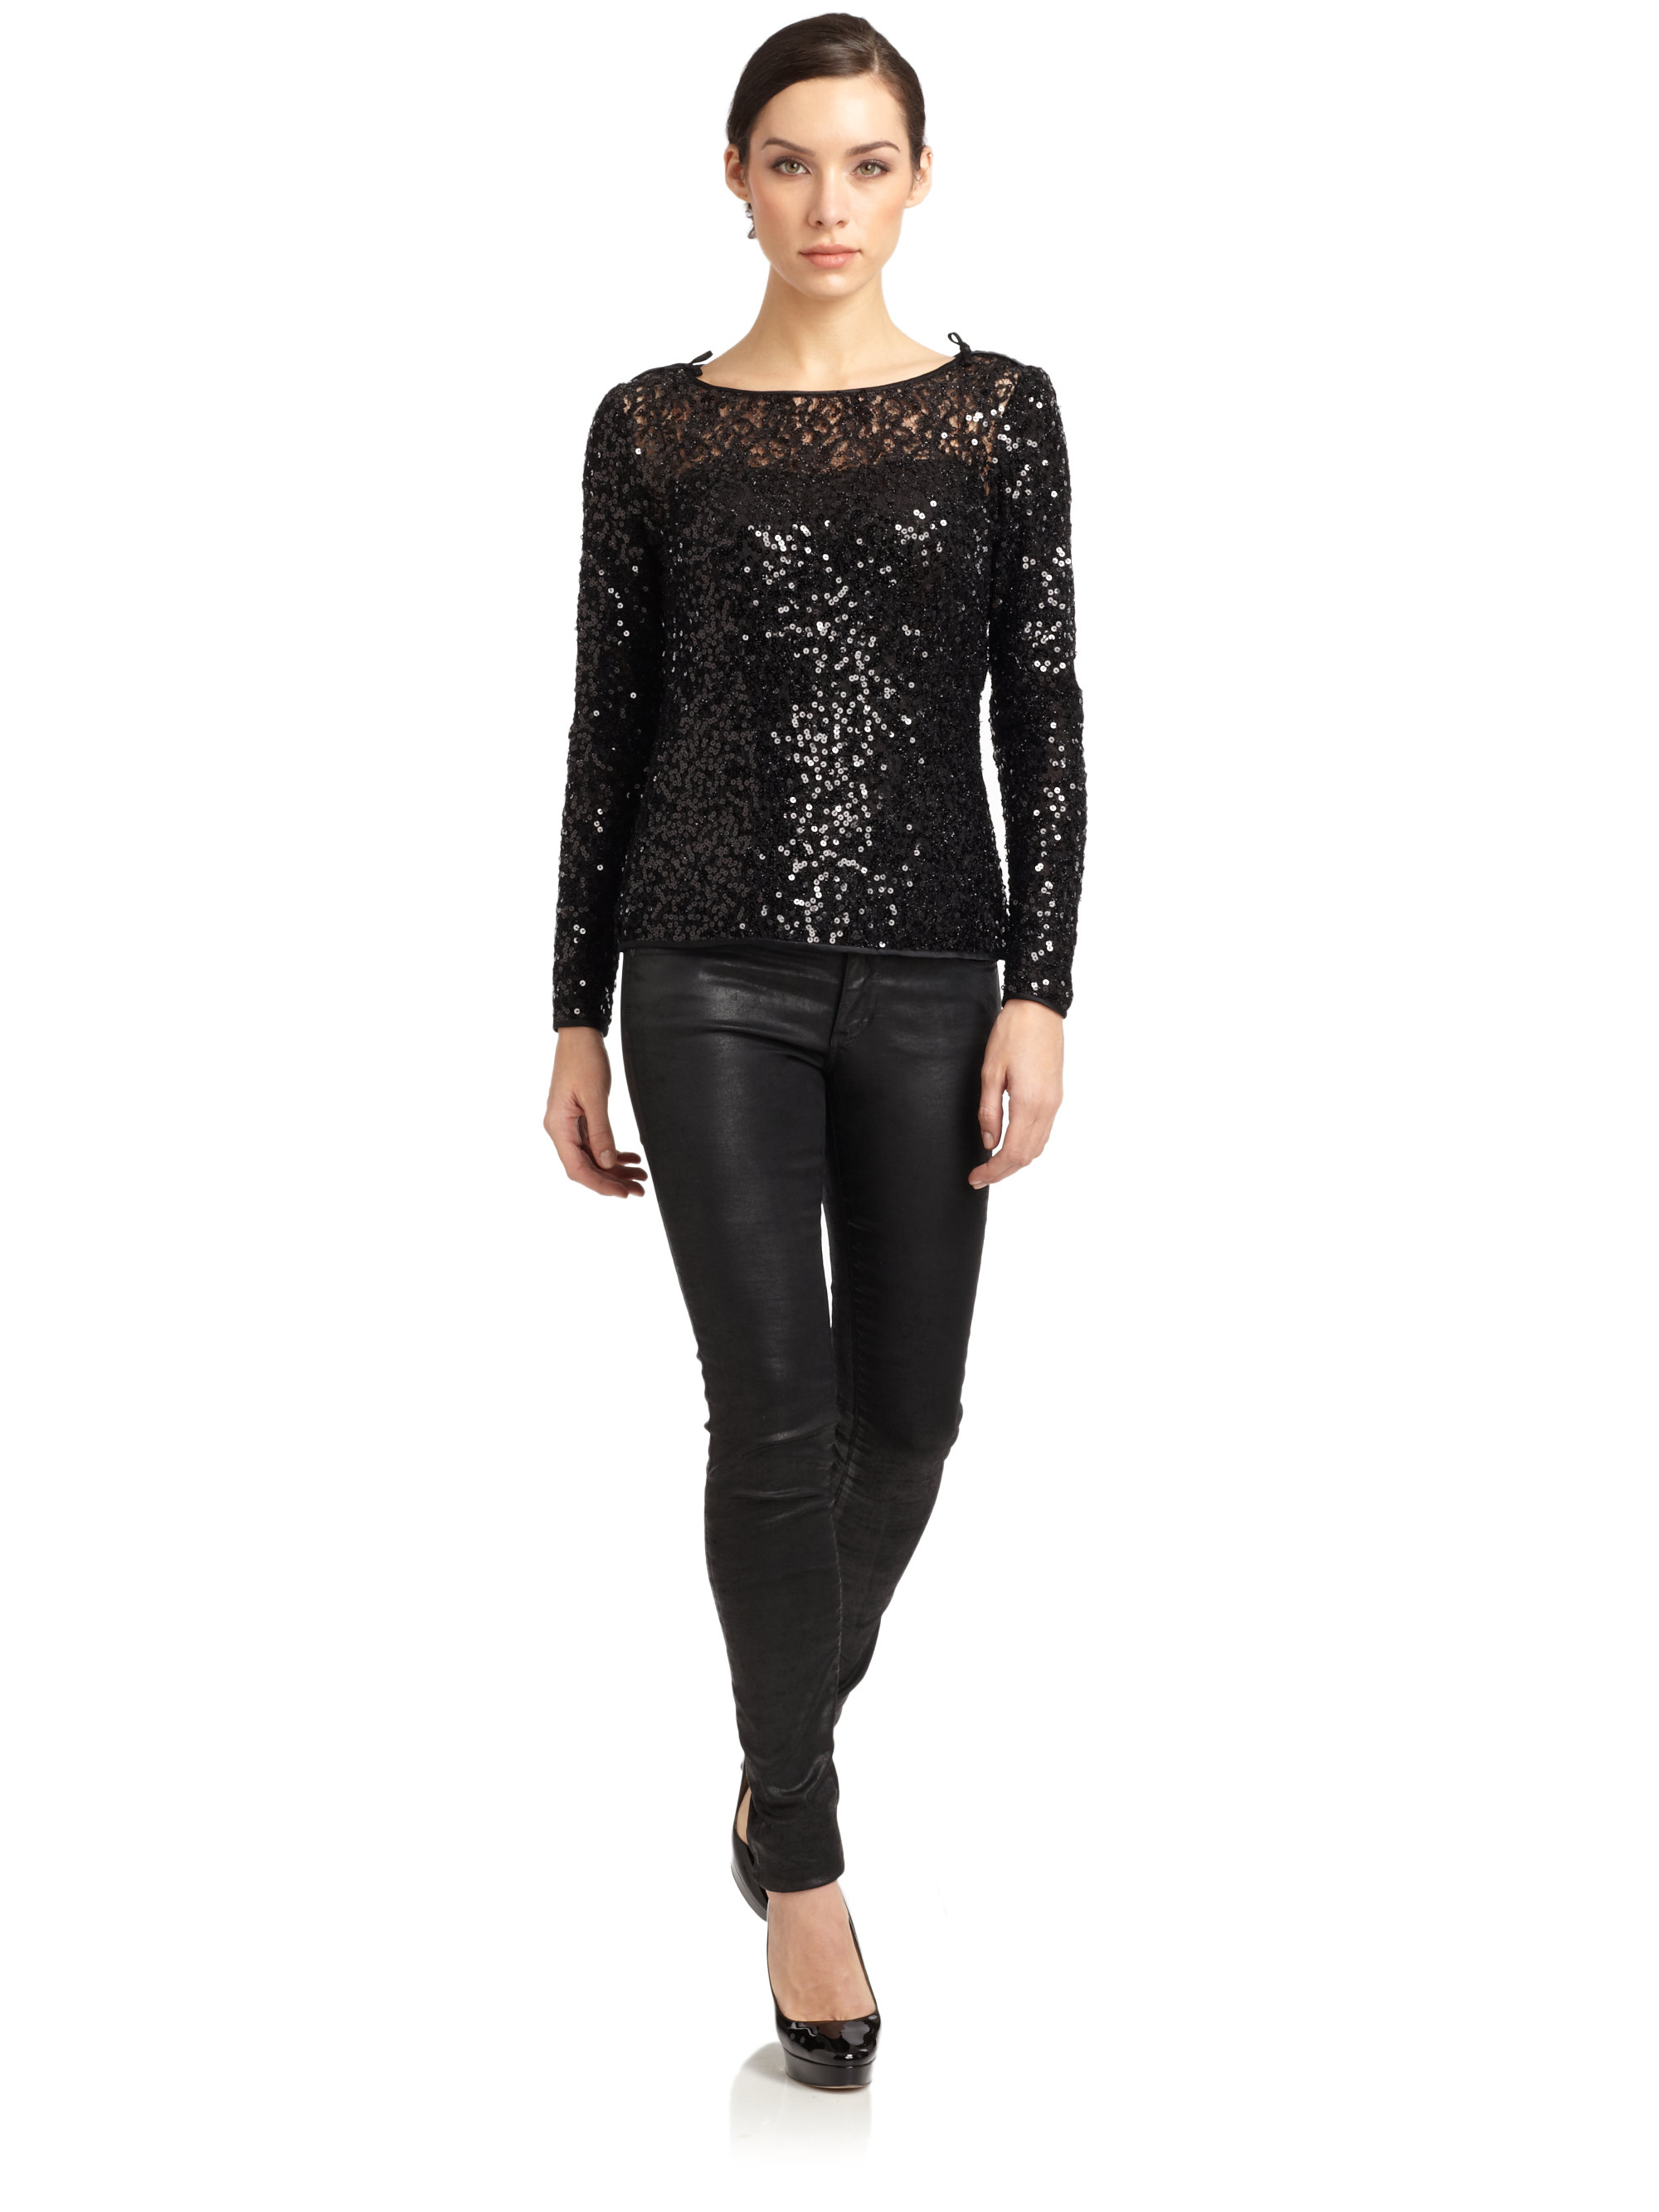 Lyst - Notte By Marchesa Sequin Long Sleeve Top in Black